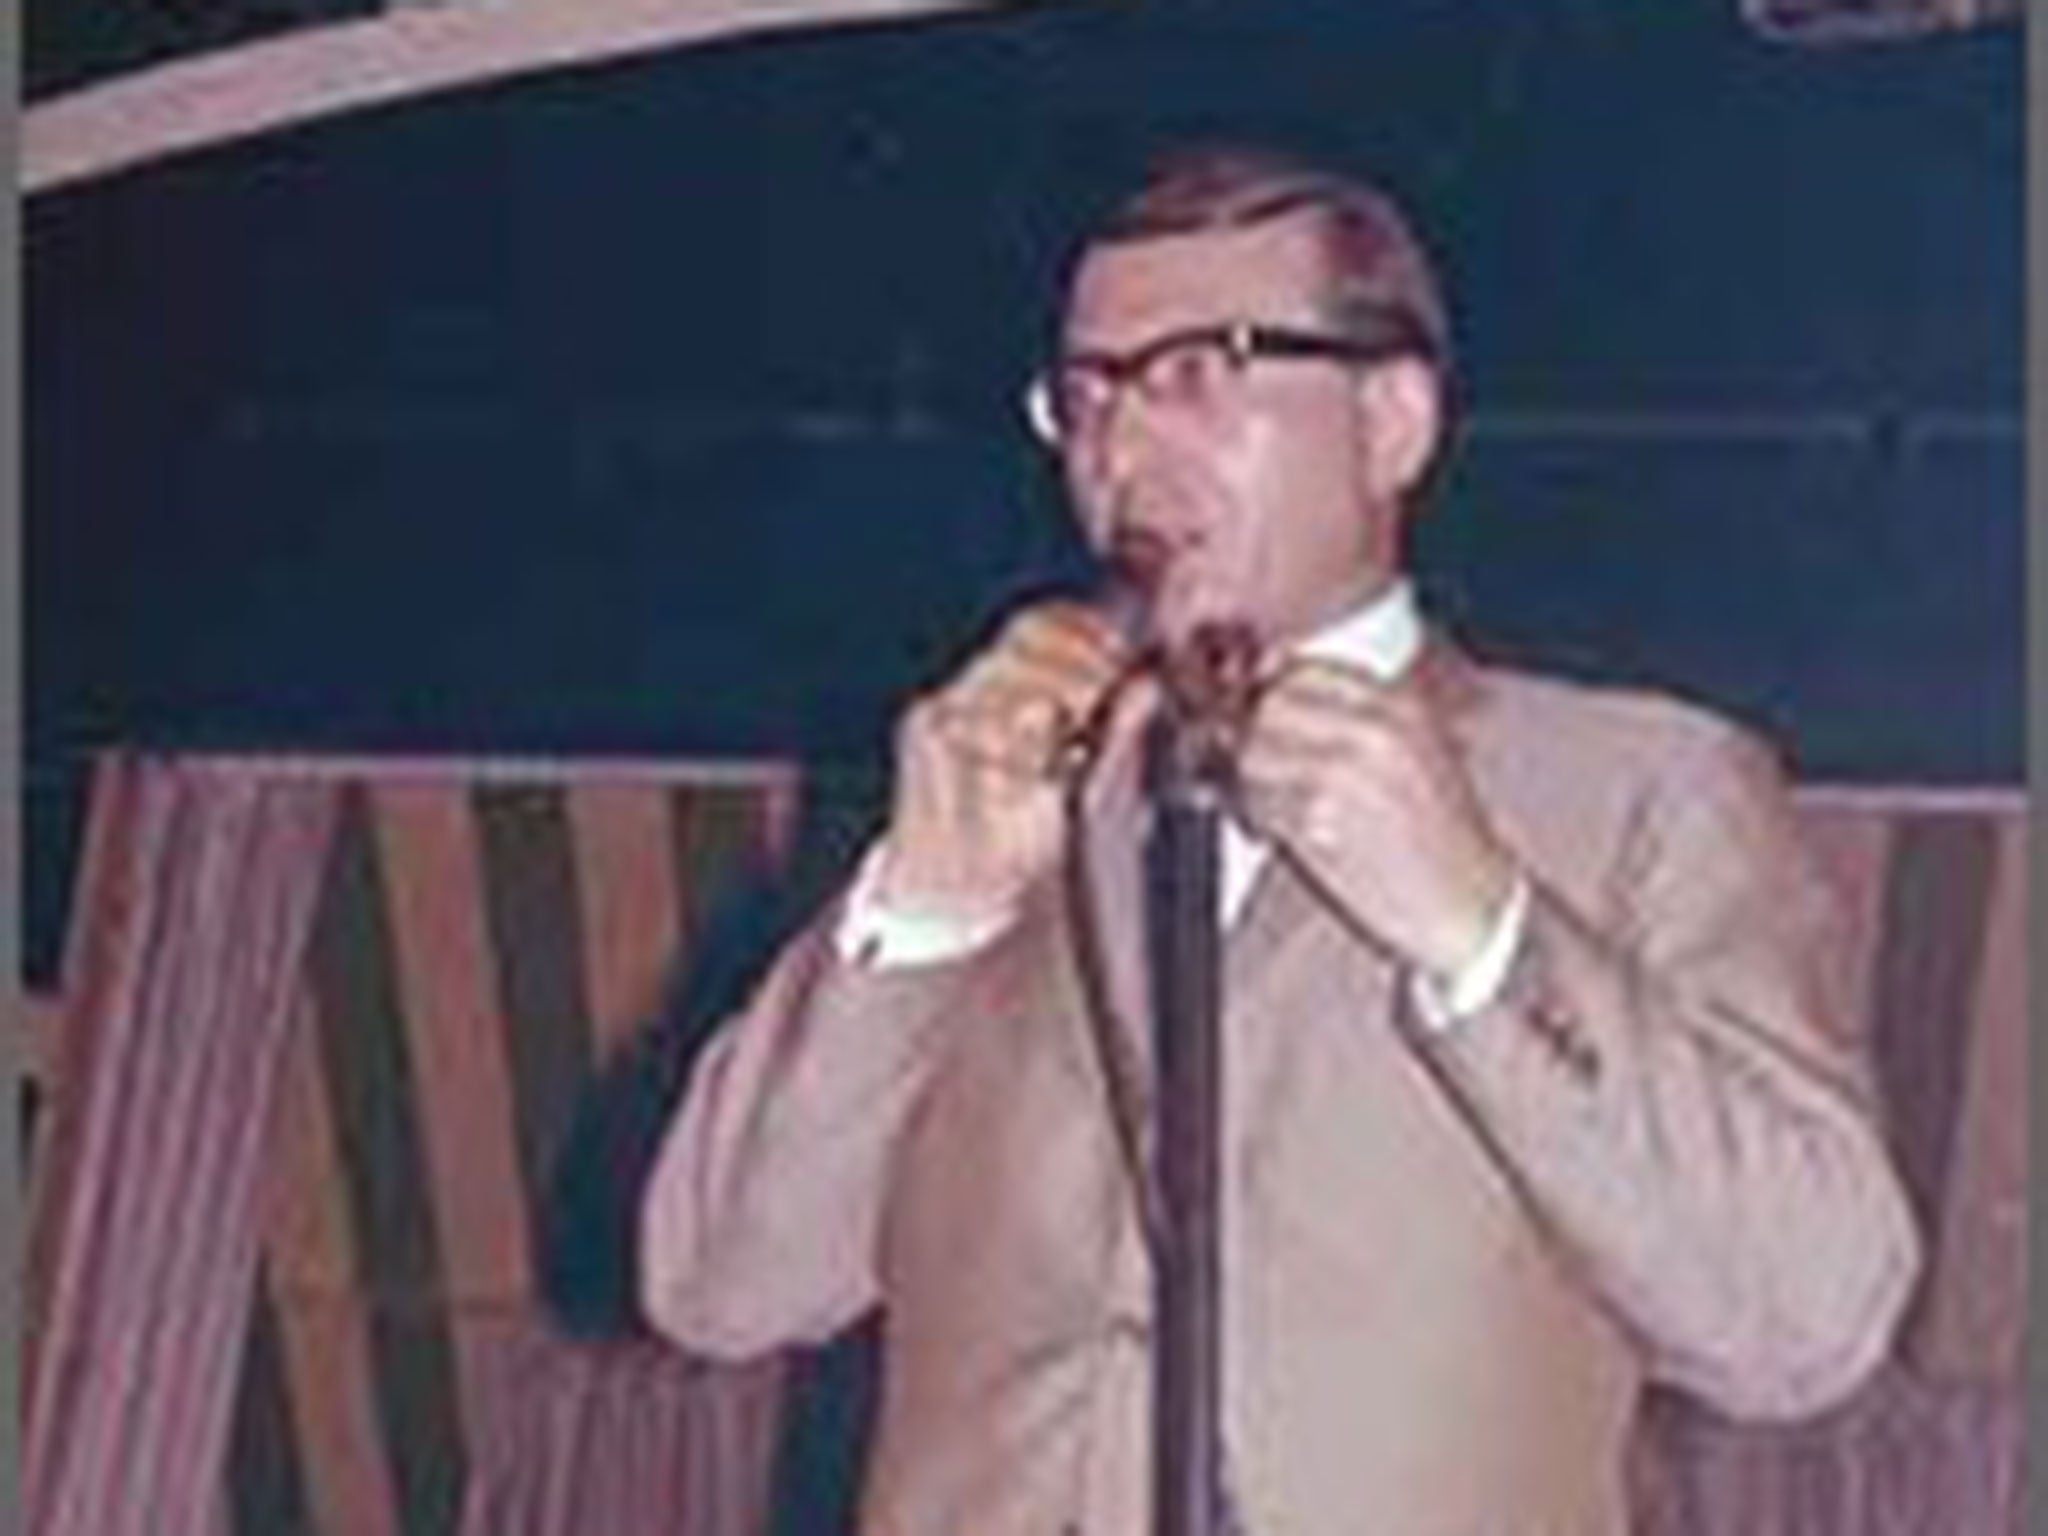 John Gee at the Marquee: after serving in the RAF he
retained an officer-like demeanour when introducing the acts